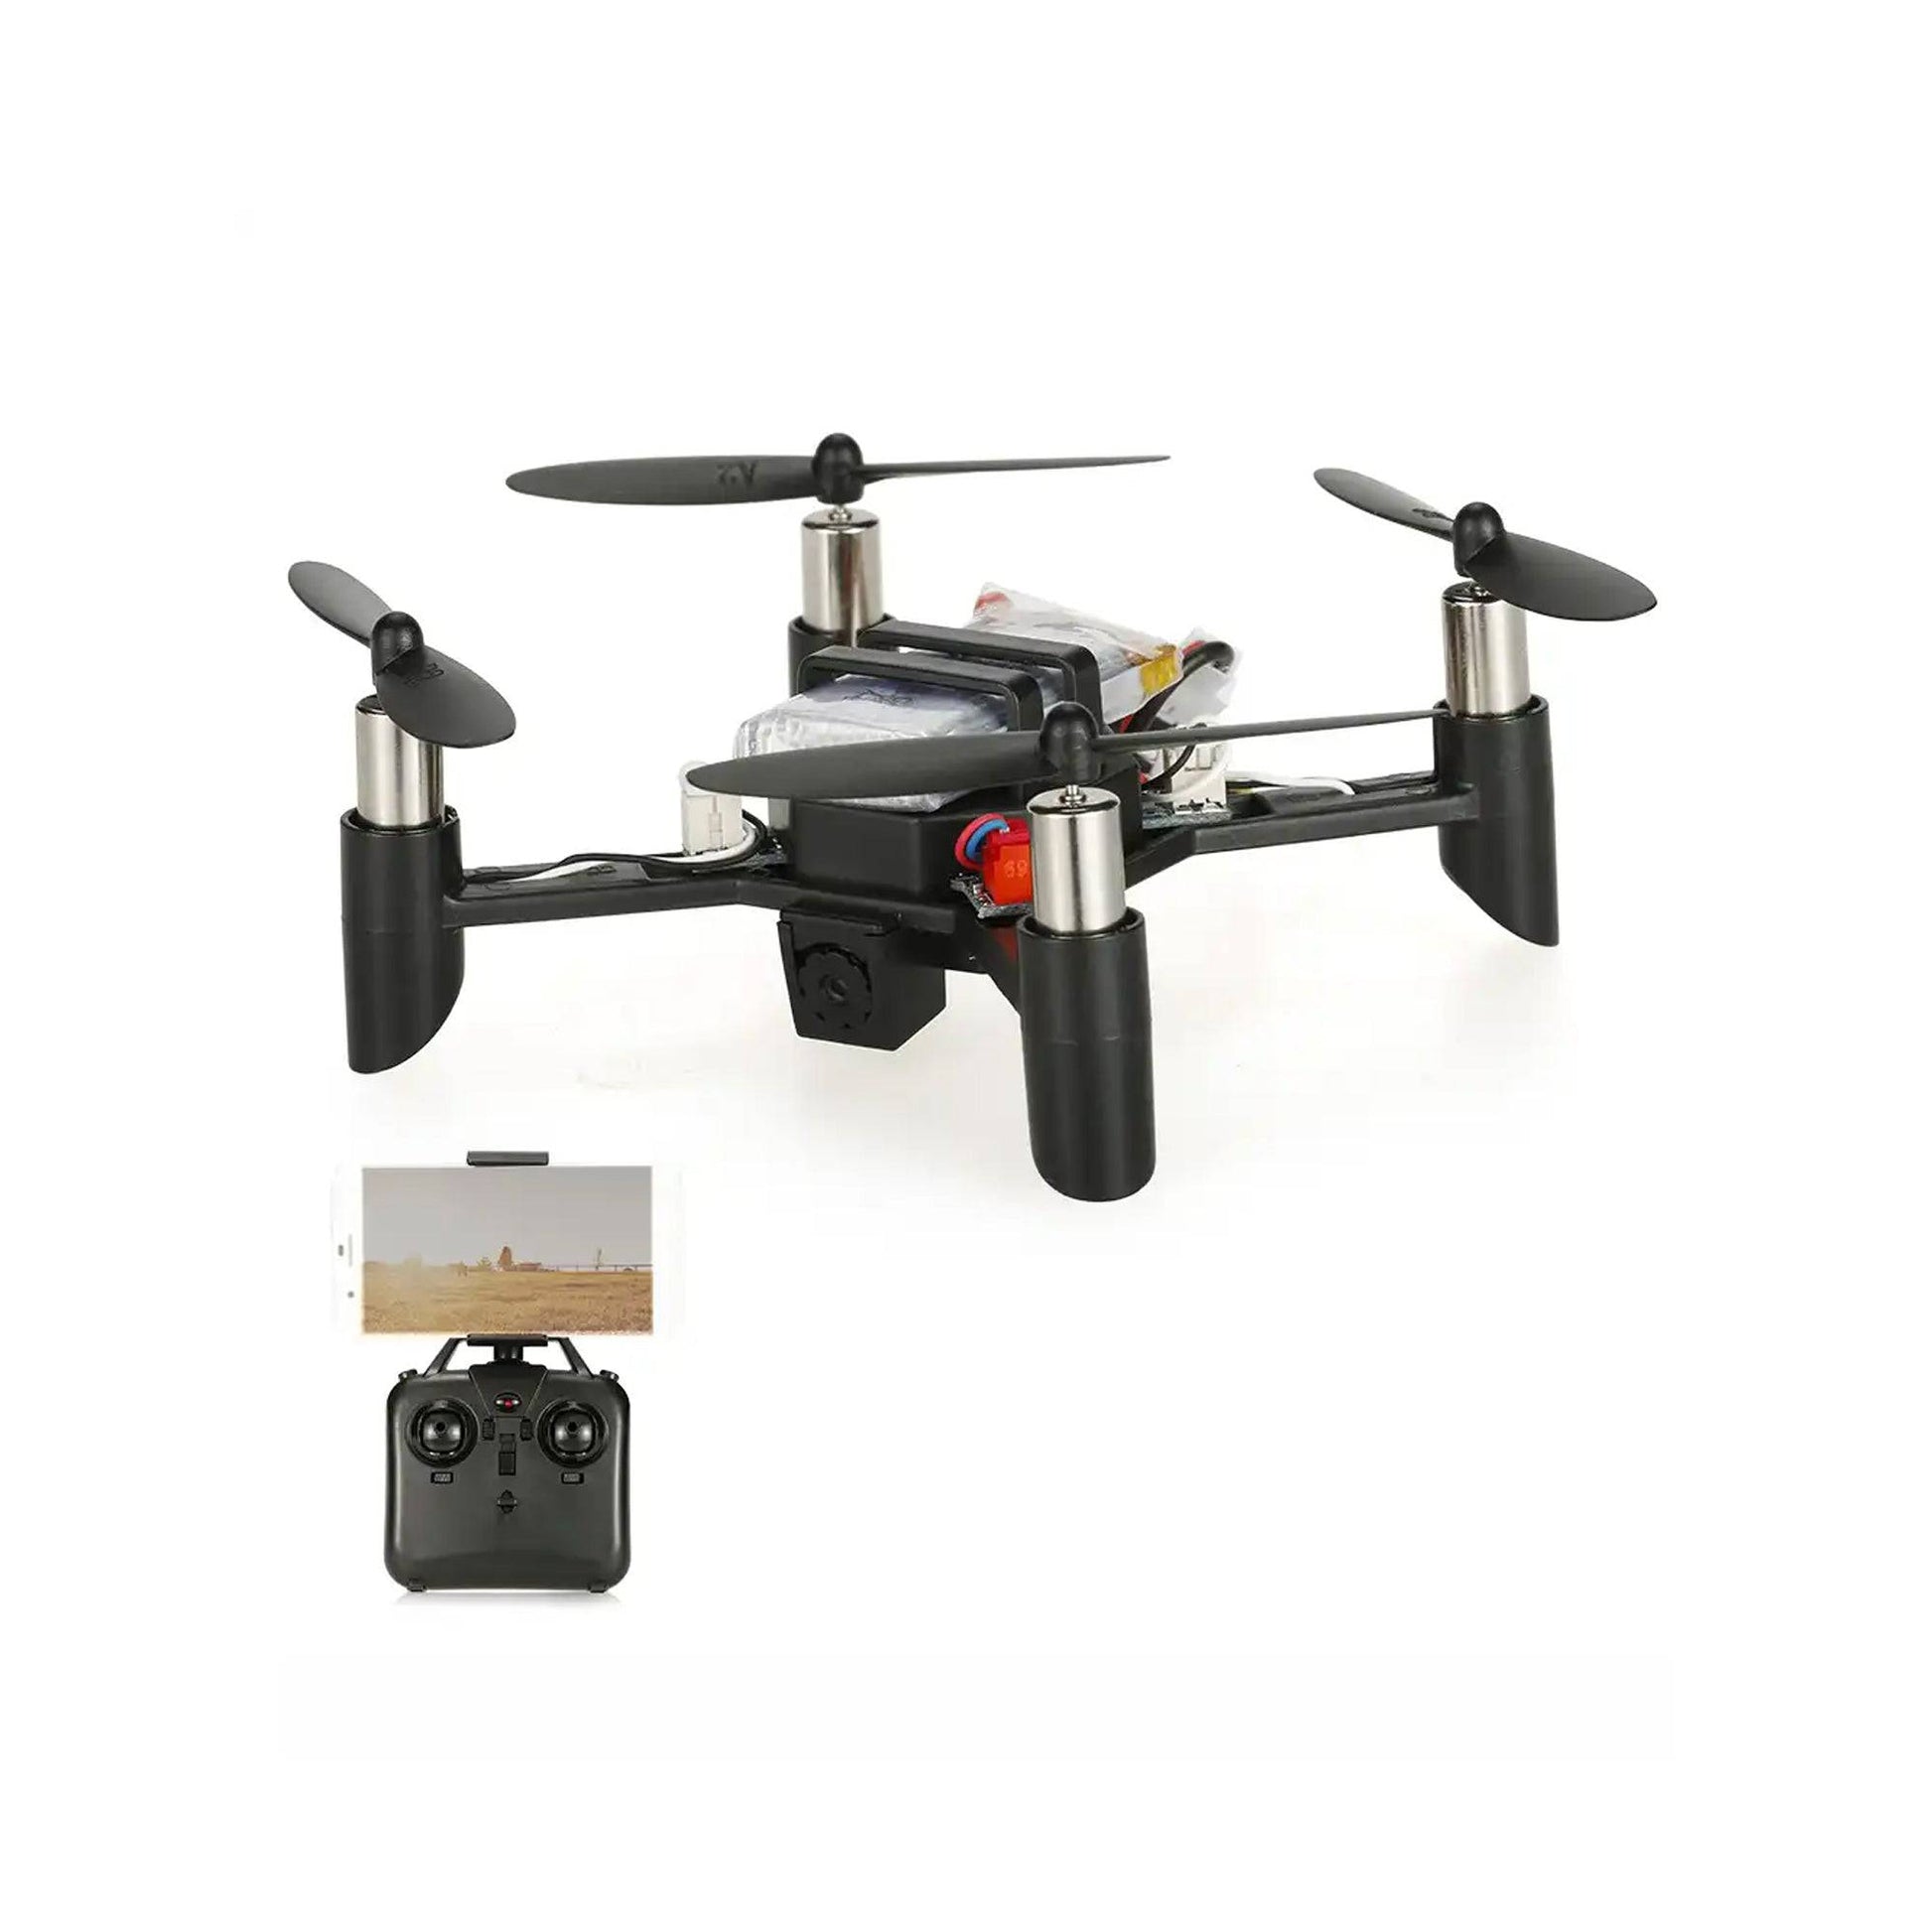 DM002HW DIY Drone with Camera 2.4GHz, 4 Channels, 6 Axis